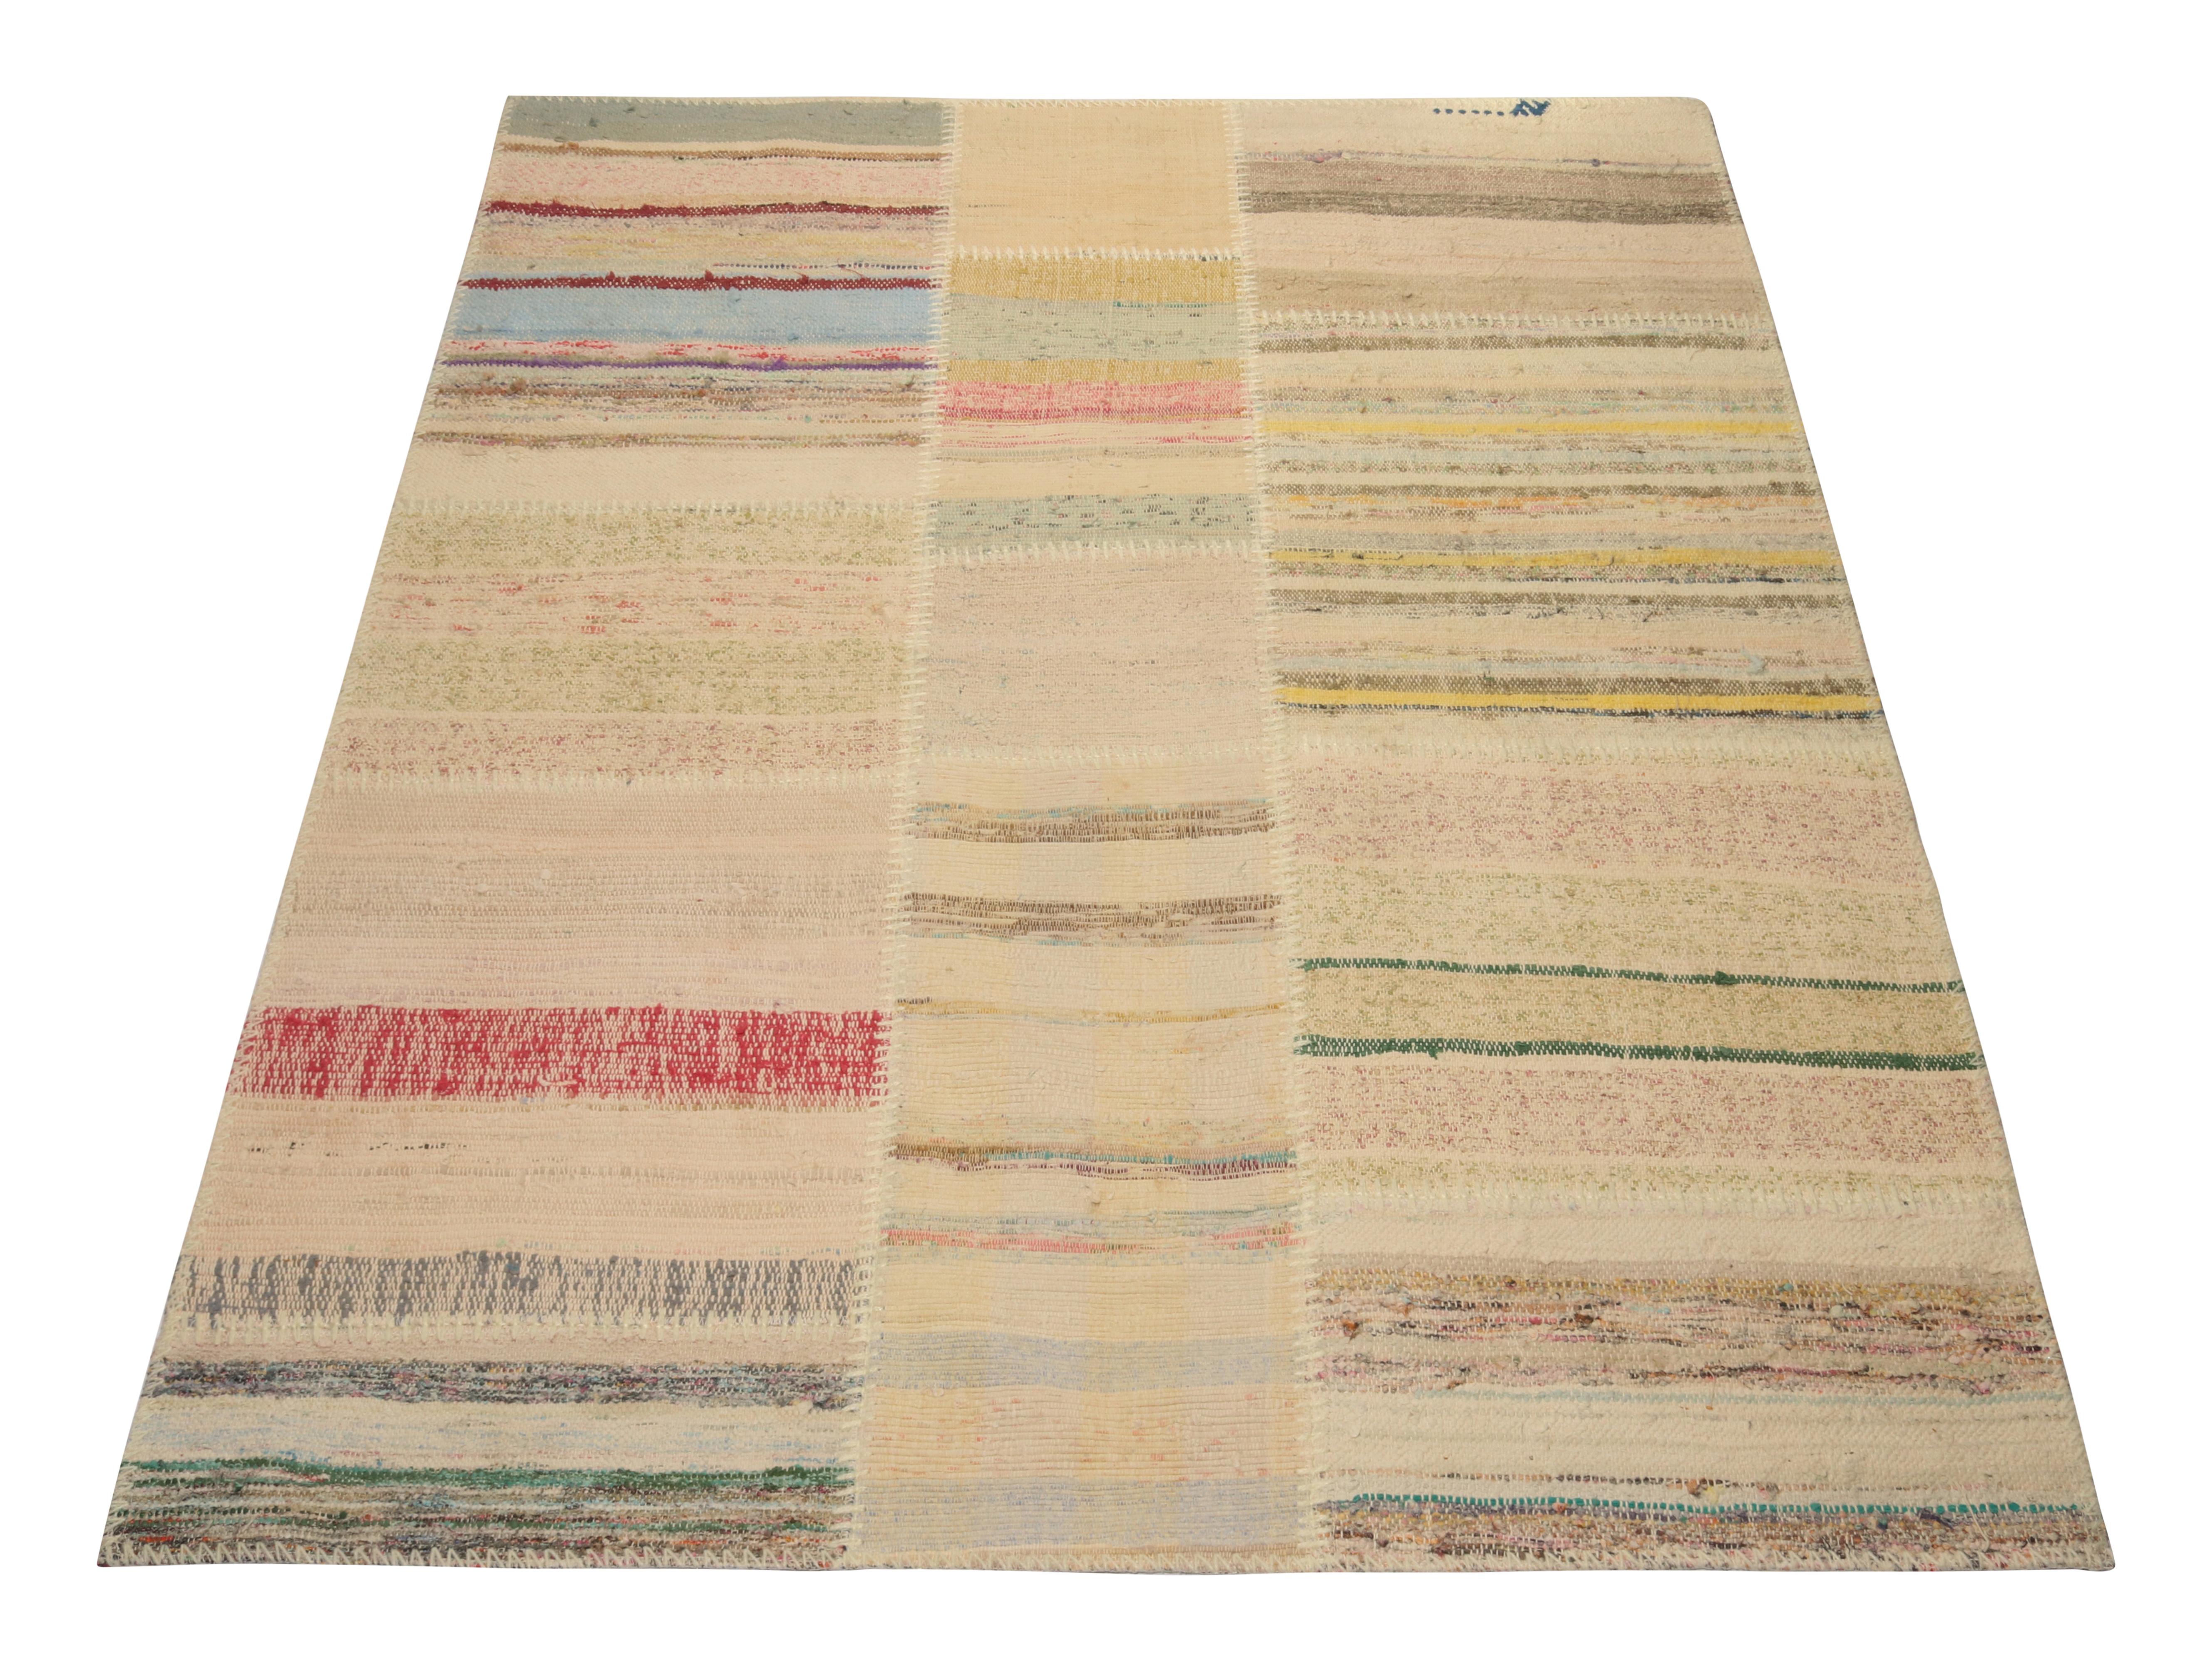 Handwoven in wool, Rug & Kilim presents a 4x5 contemporary rug from their innovative new patchwork kilim collection. 

On the Design: 

This flat weave technique repurposes vintage yarns in polychromatic stripes and striae, achieving a playful look